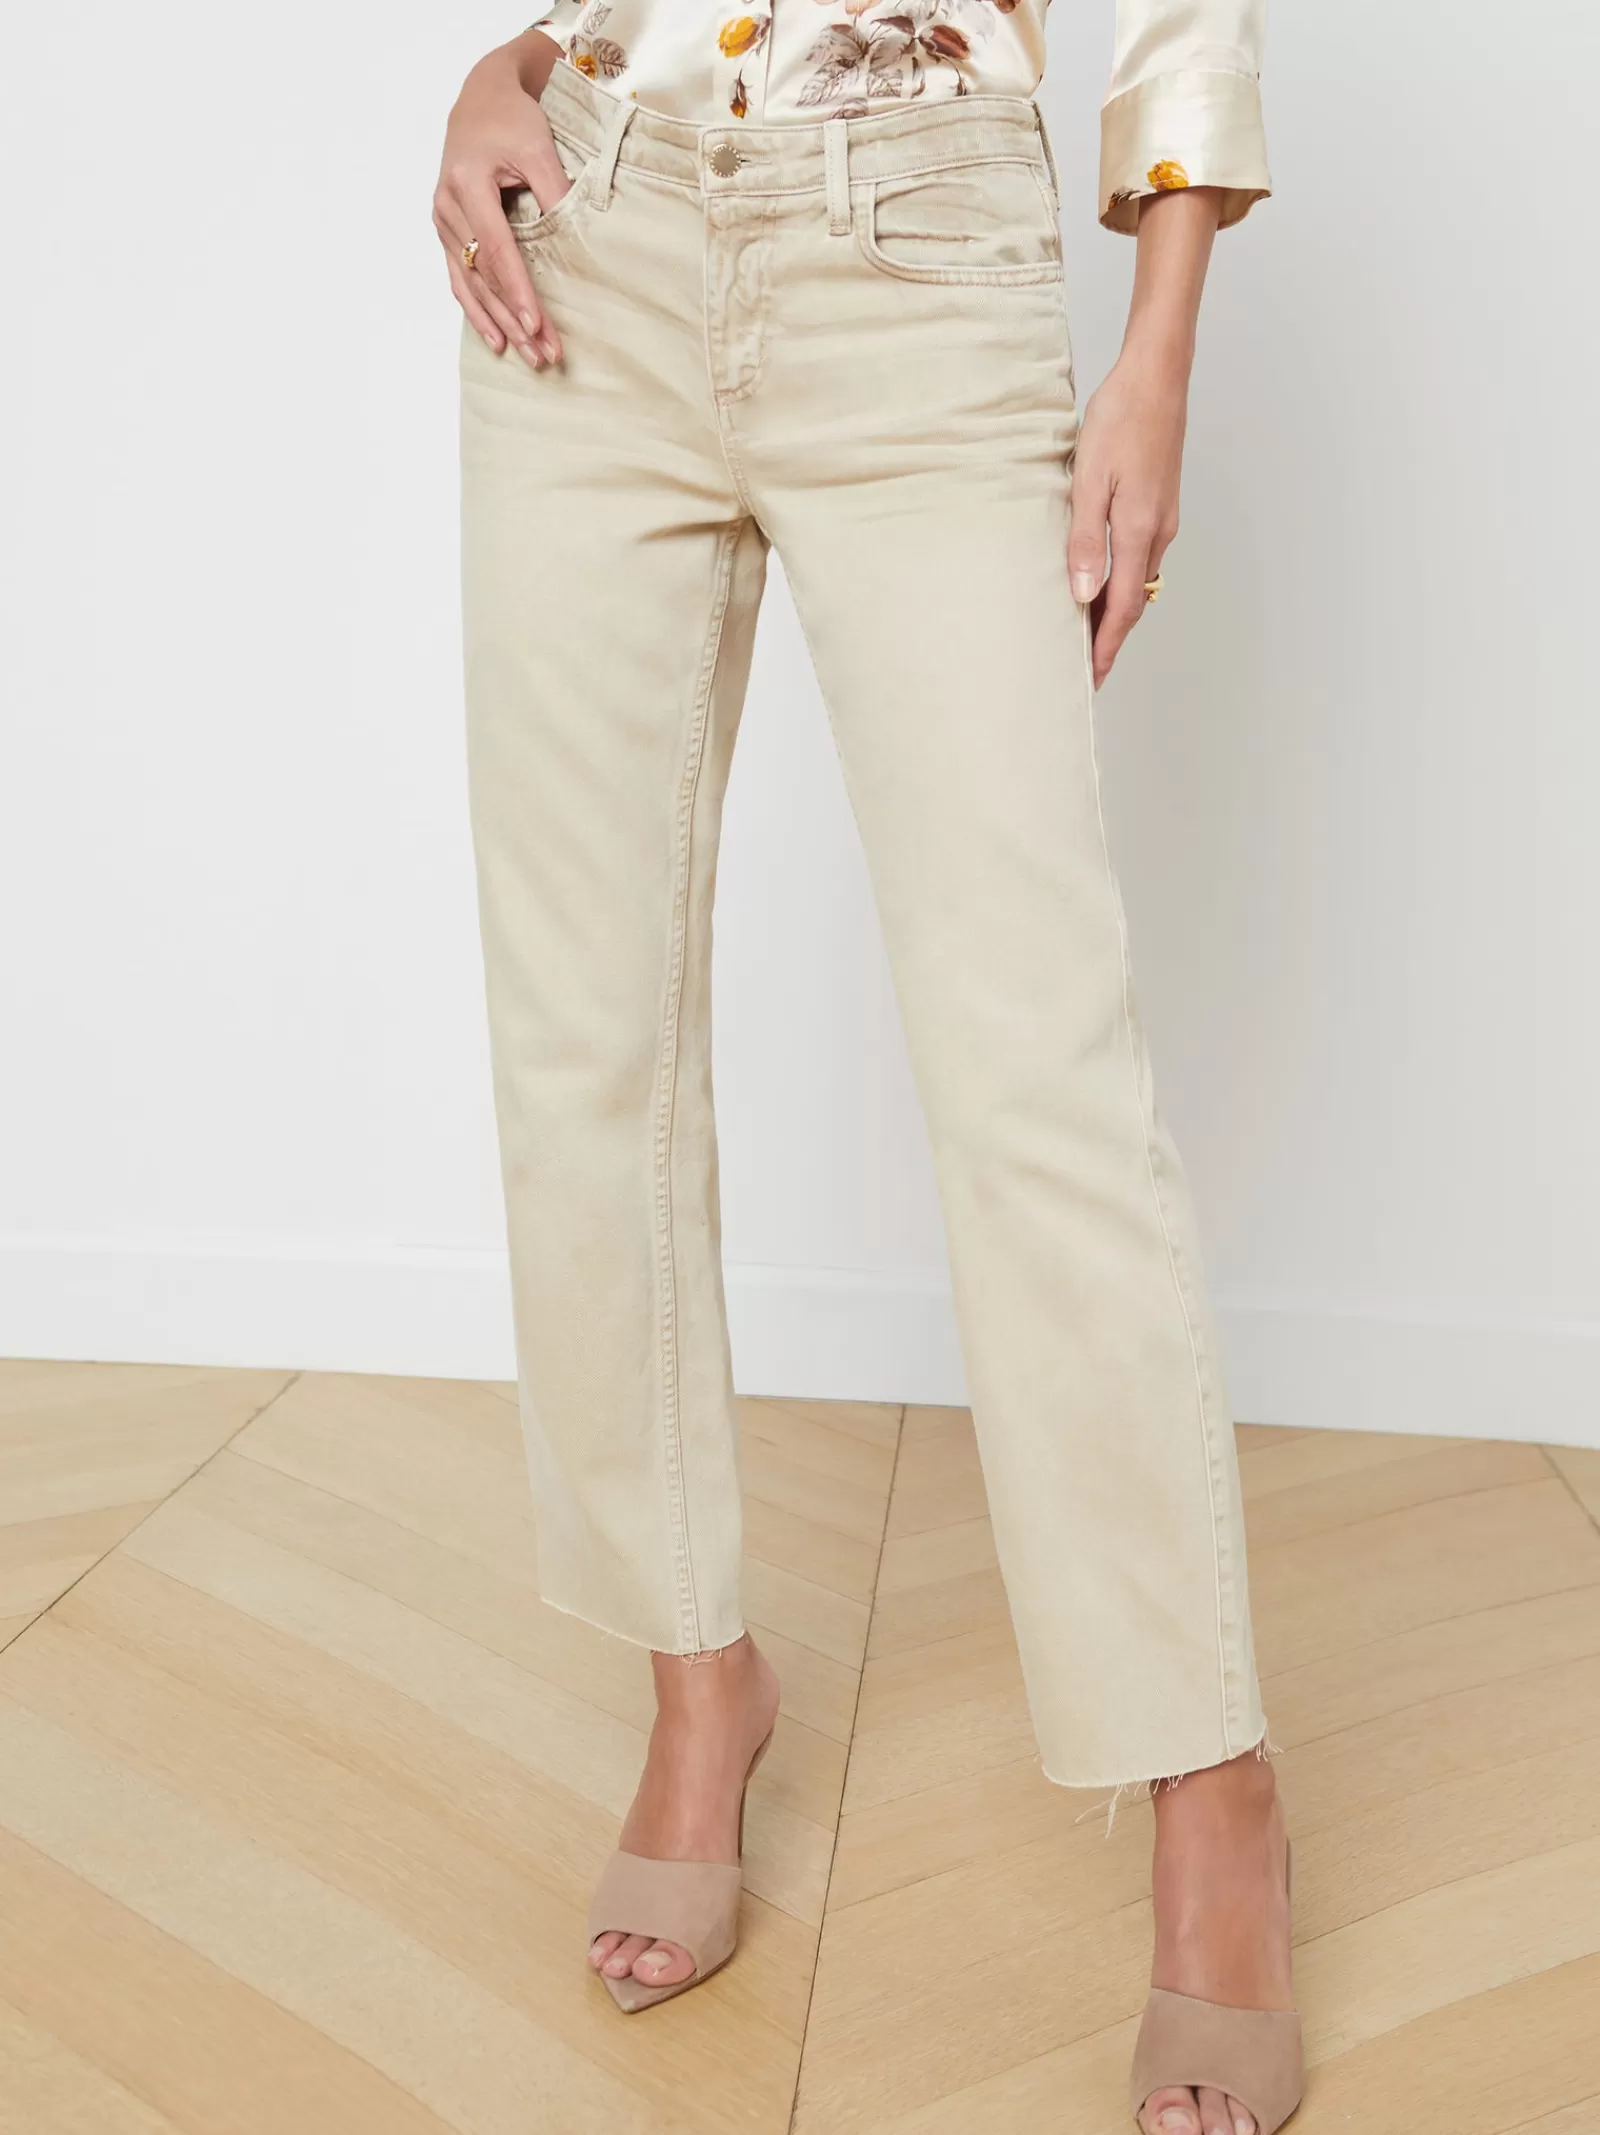 L'AGENCE Milana Slouchy Stovepipe Jean< Back in Stock | Resort Collection